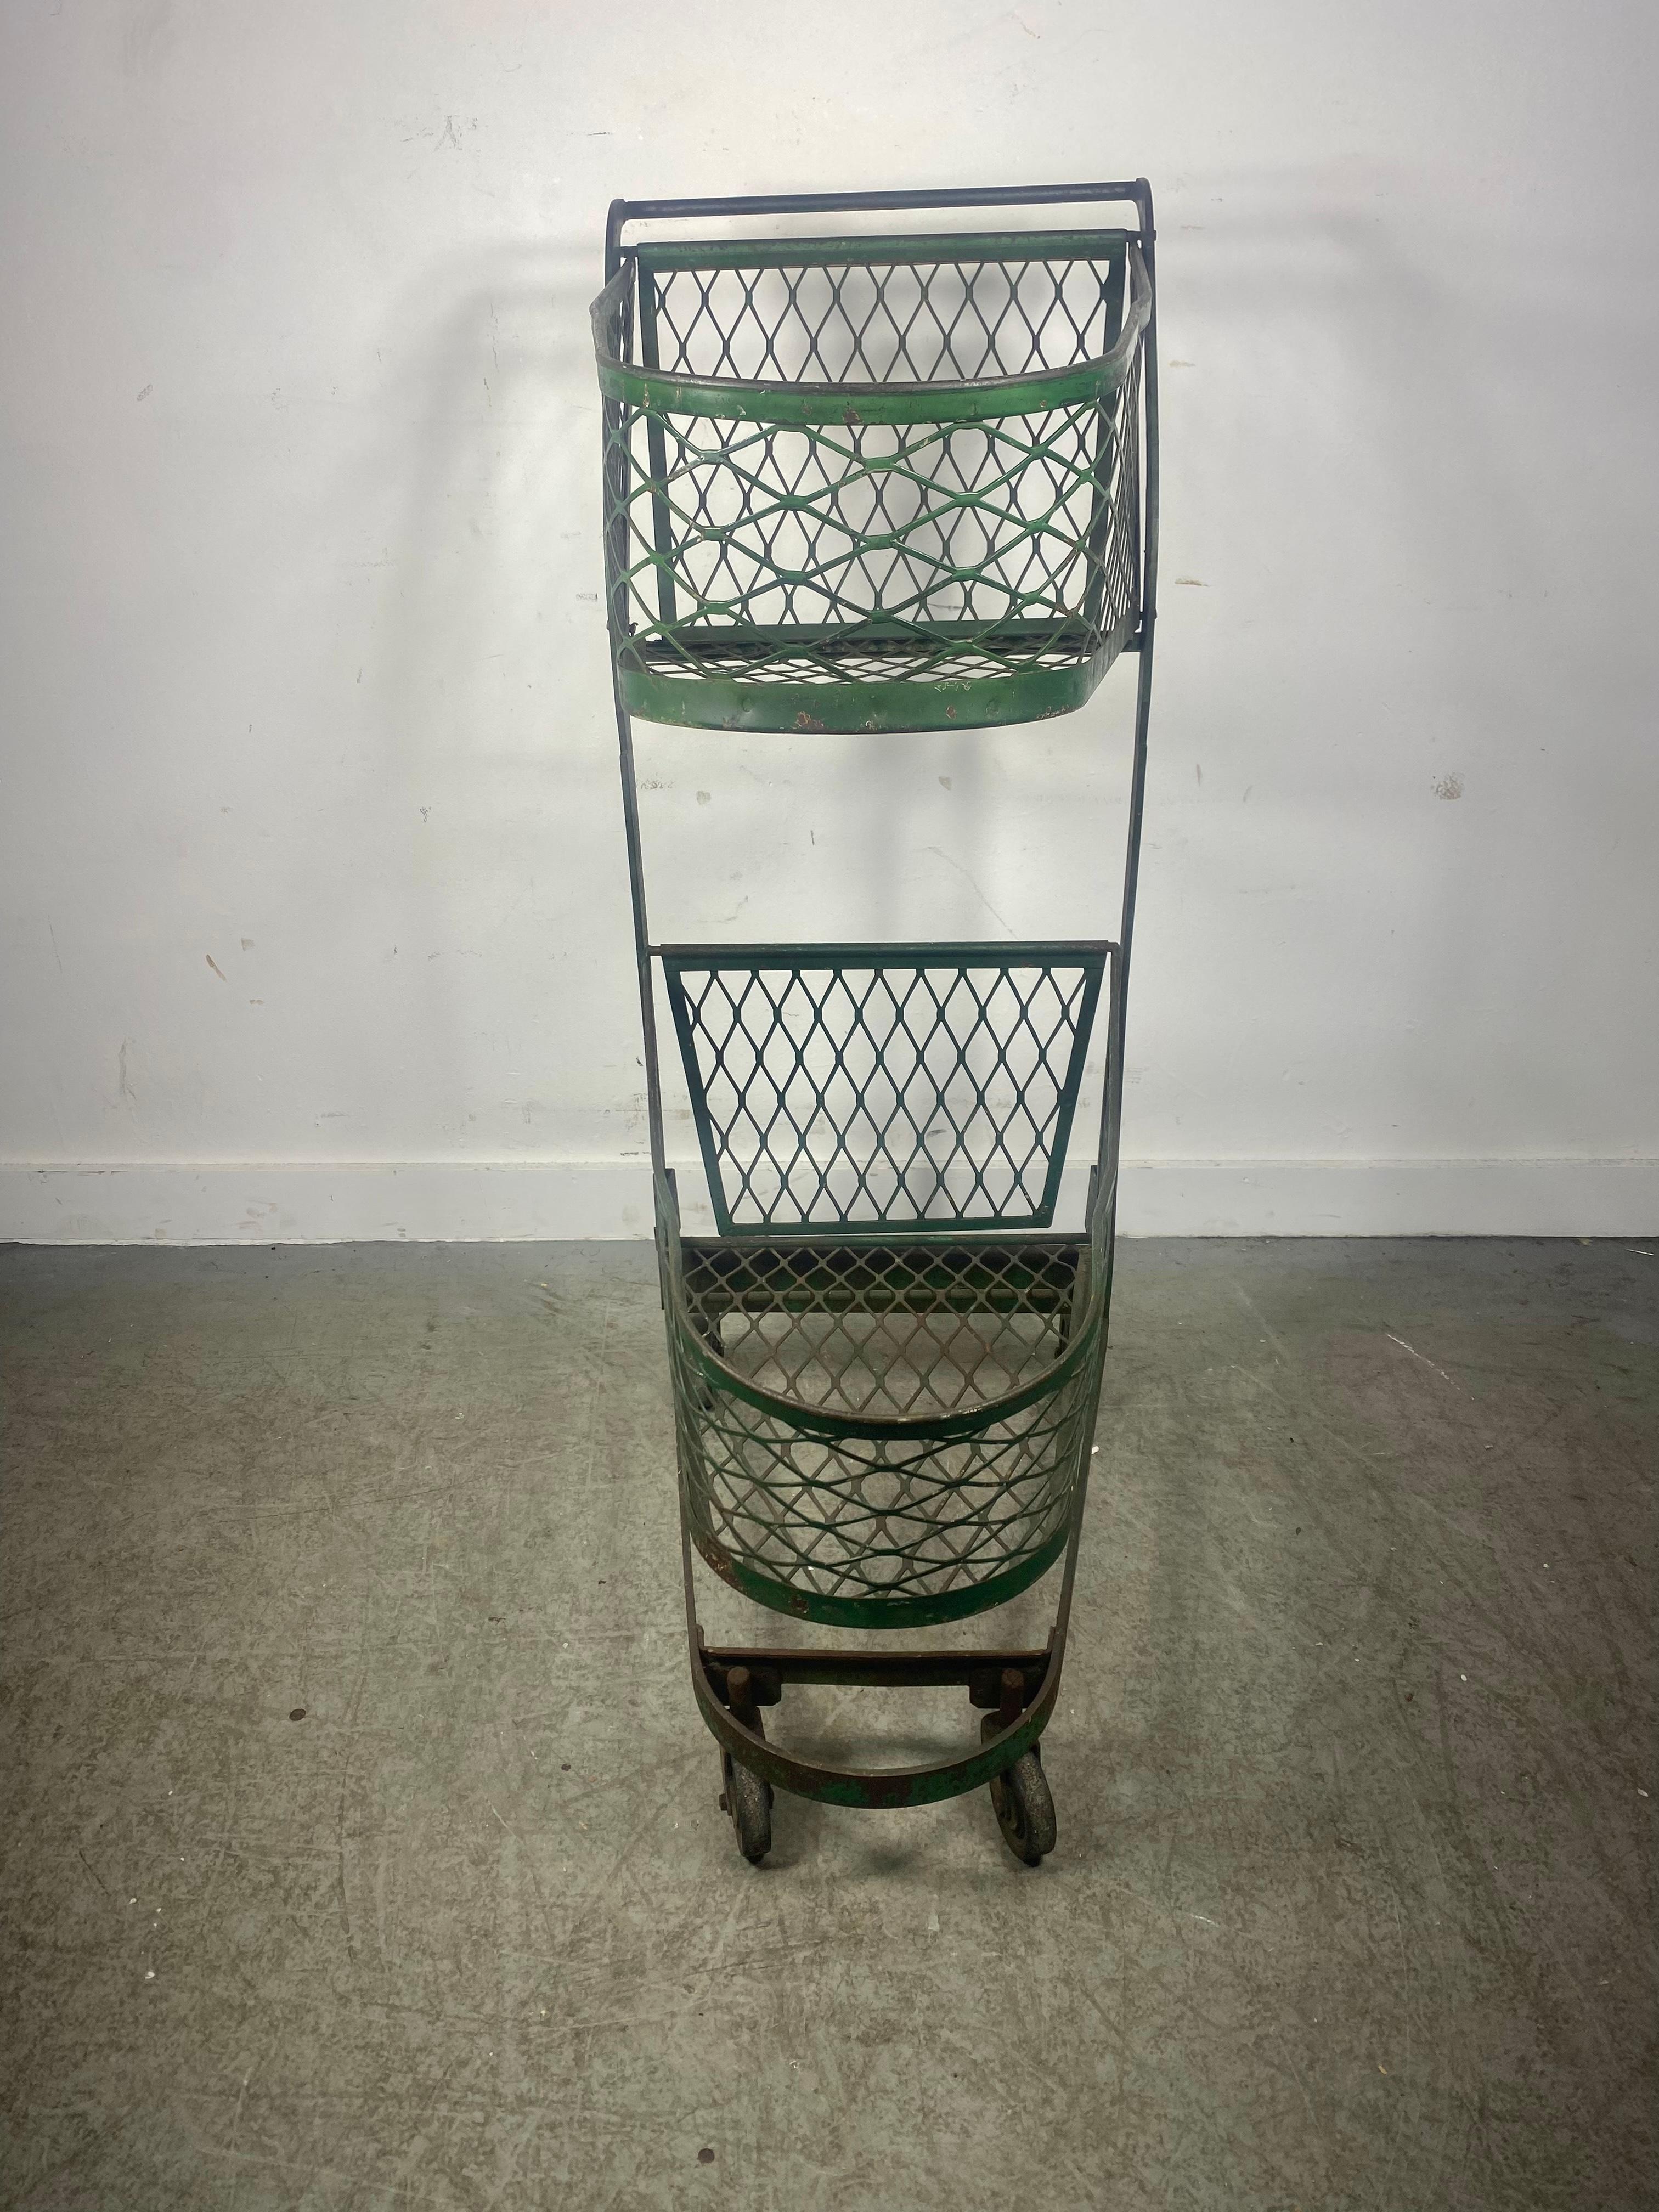 antique grocery cart